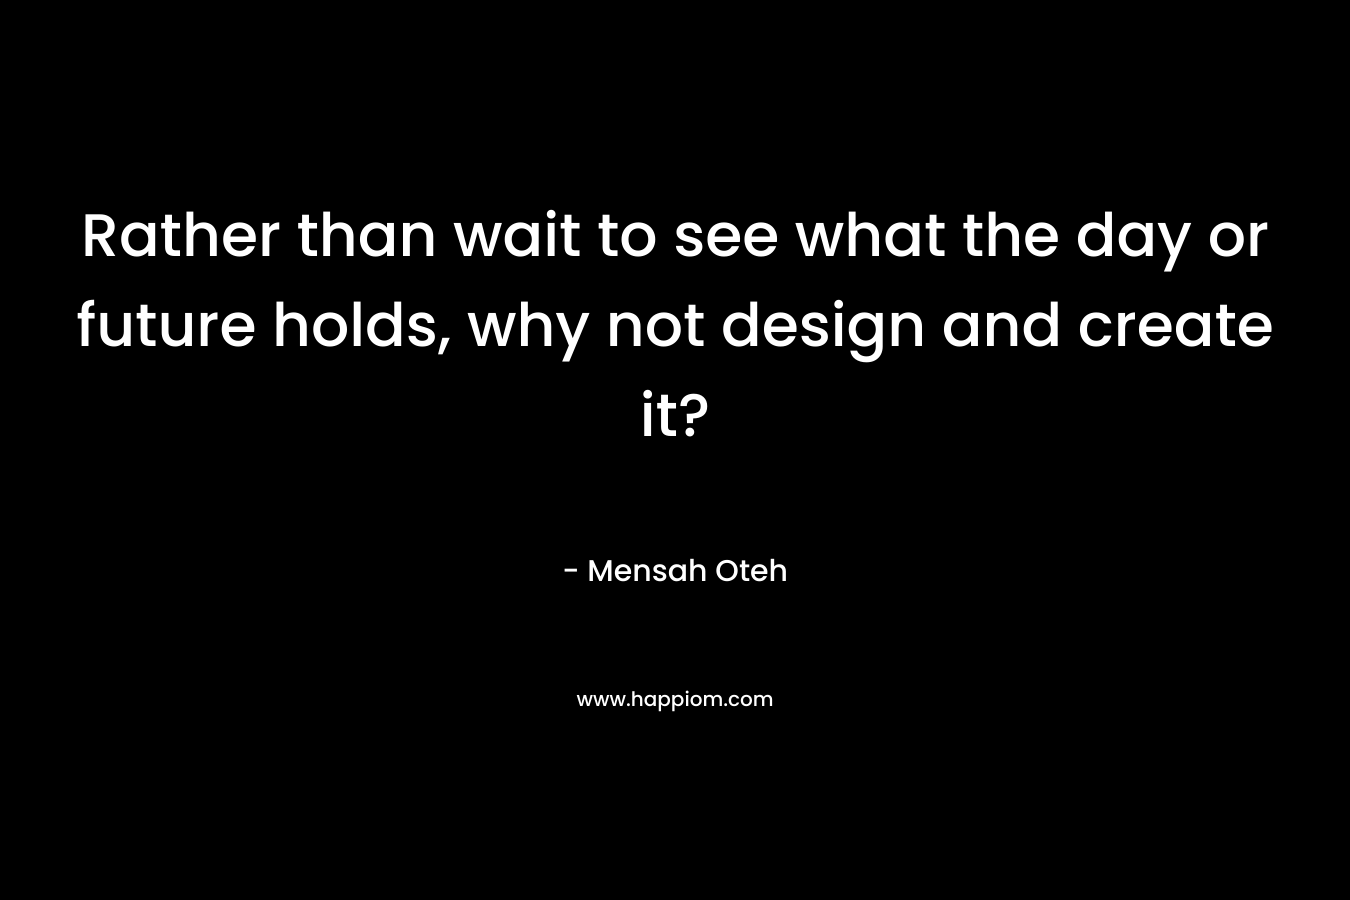 Rather than wait to see what the day or future holds, why not design and create it?